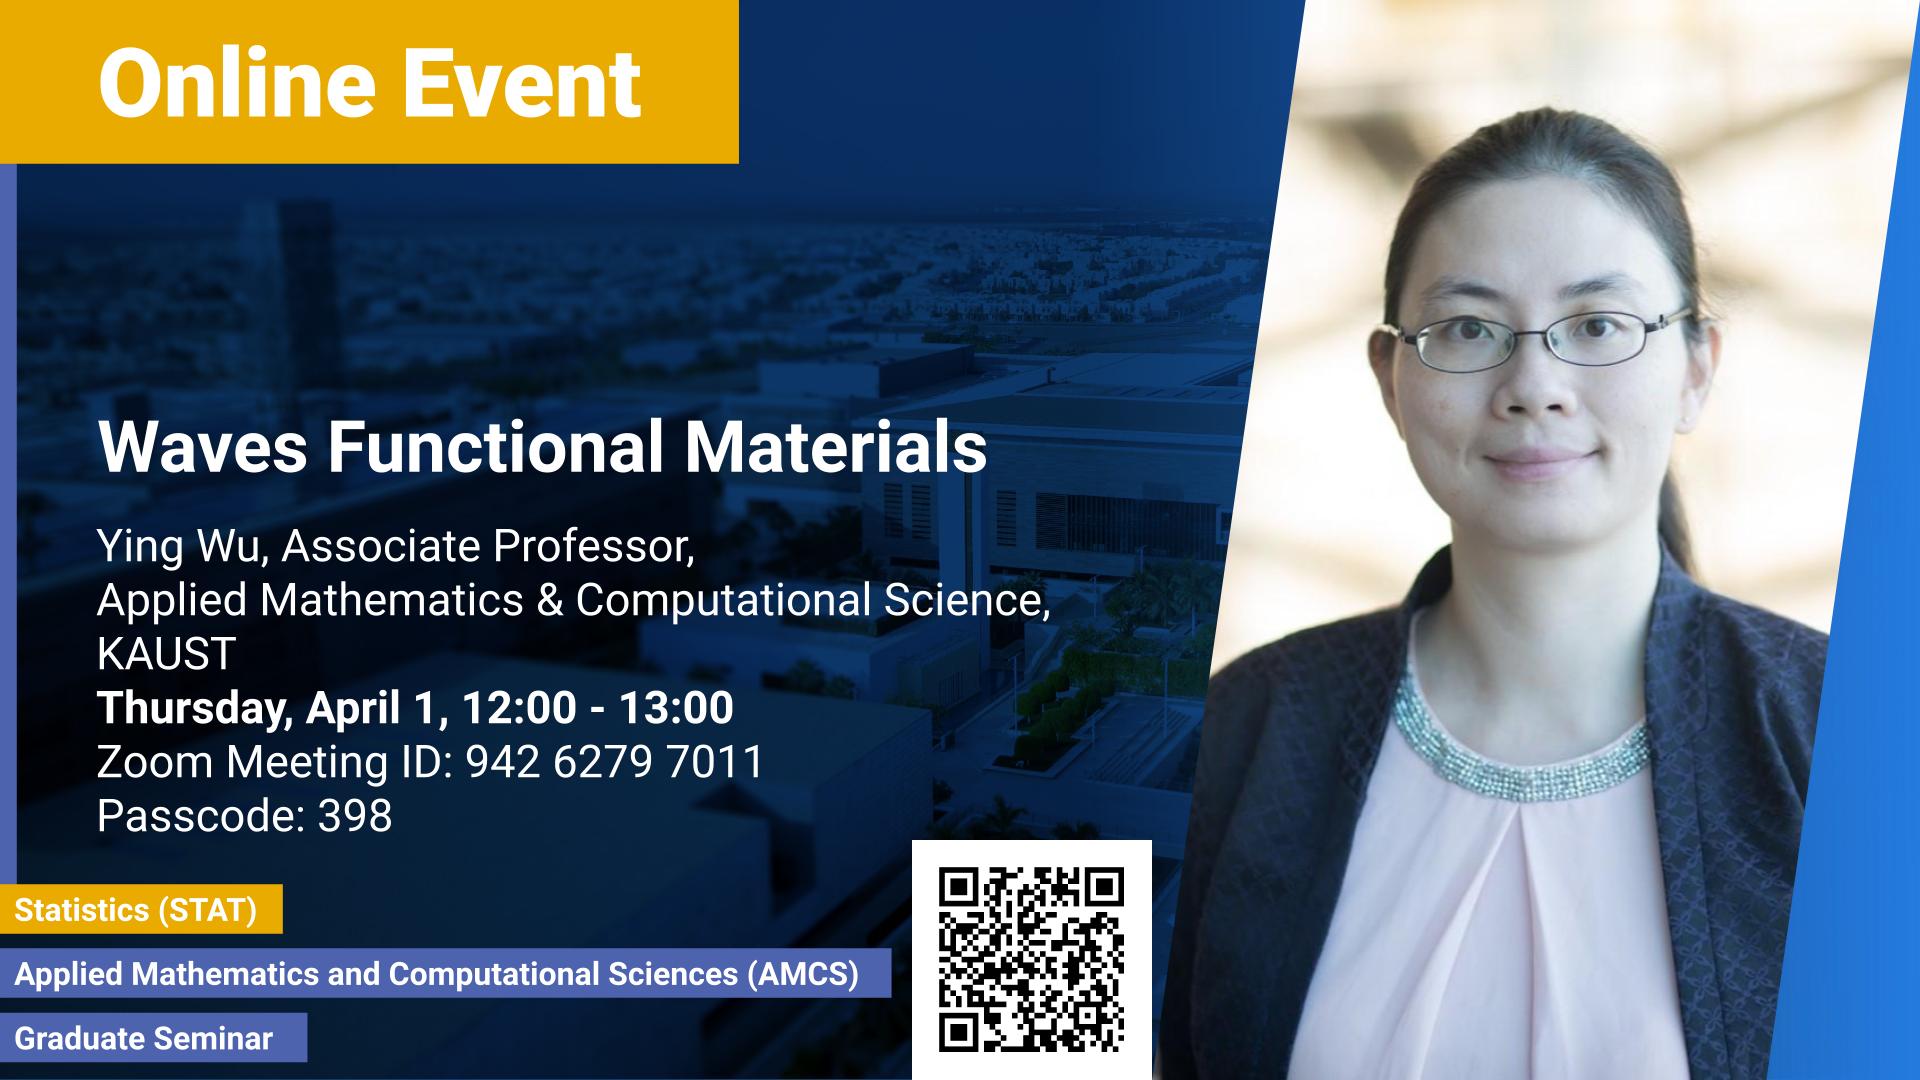 KAUST CEMSE AMCS STAT Graduate Seminar Ying Wu Waves Funtional Materials 